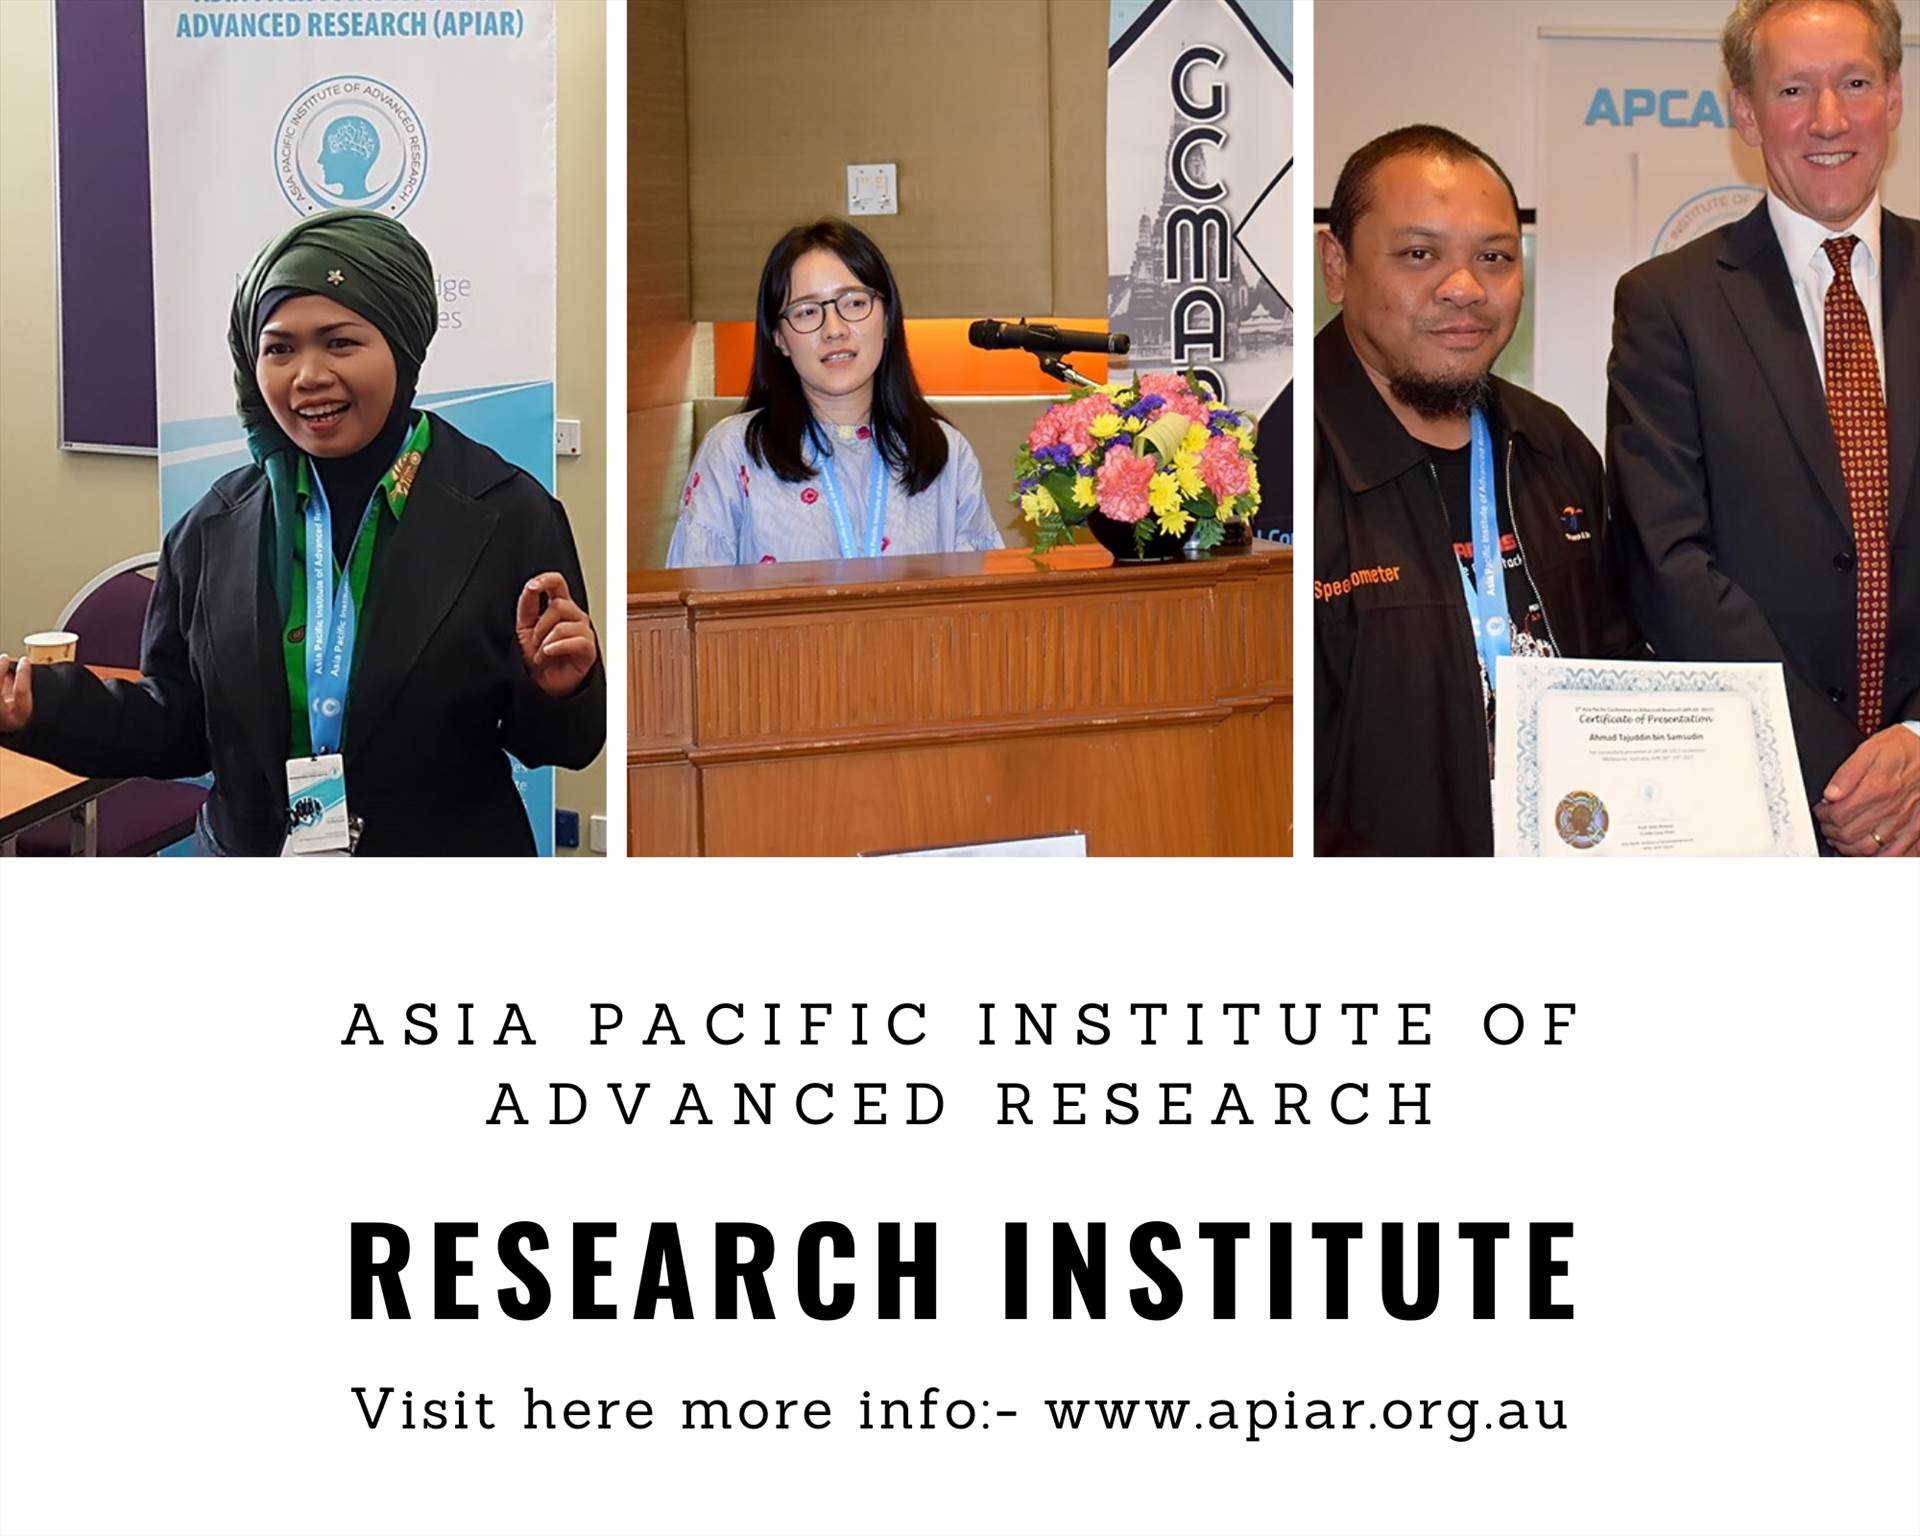 Research Institute-Apiar.org.au (1).png  by apiaracademics